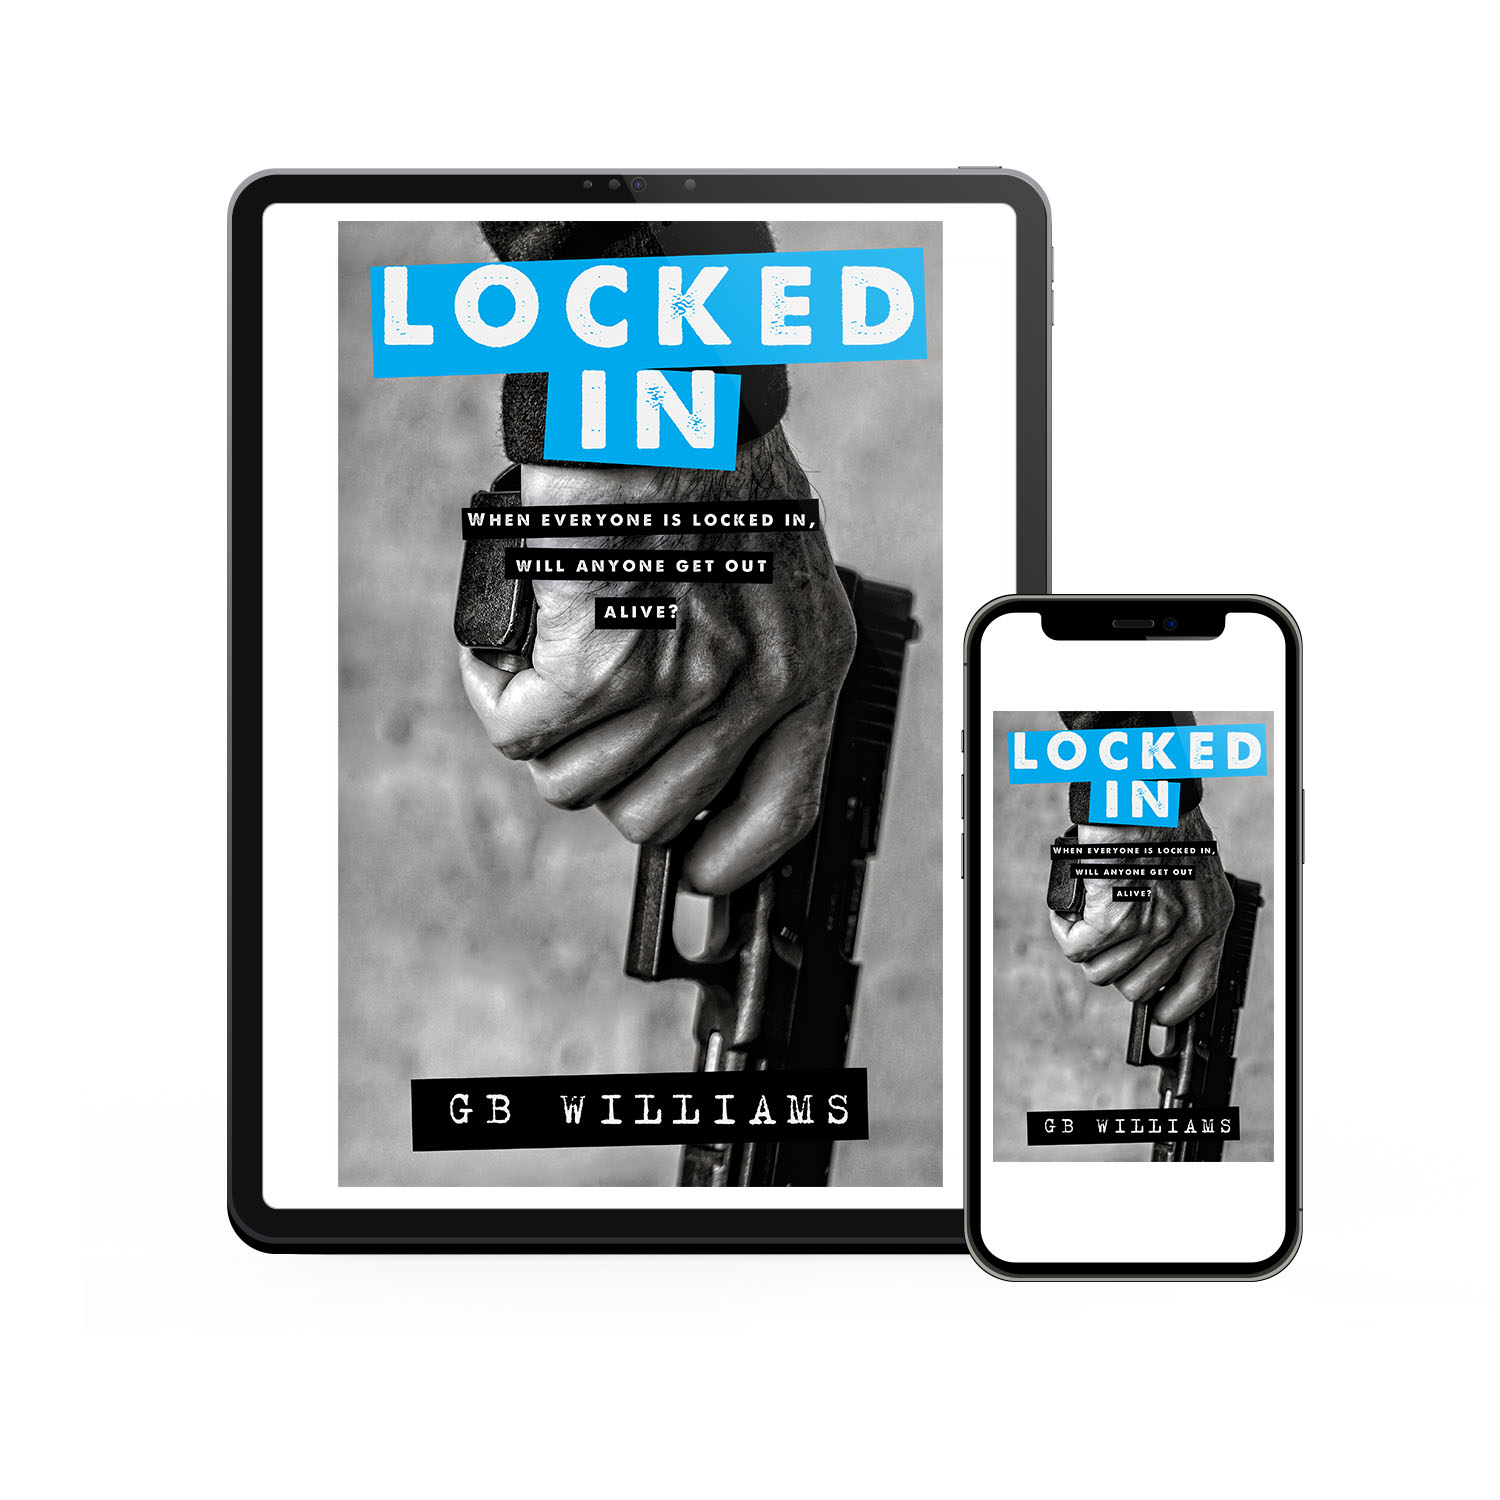 The 'Locked' Trilogy is a gritty British crime thriller series. The author is G.B. Williams. The book covers and boxset were designed by Mark Thomas of coverness.com. To find out more about my book design services, please visit www.coverness.com